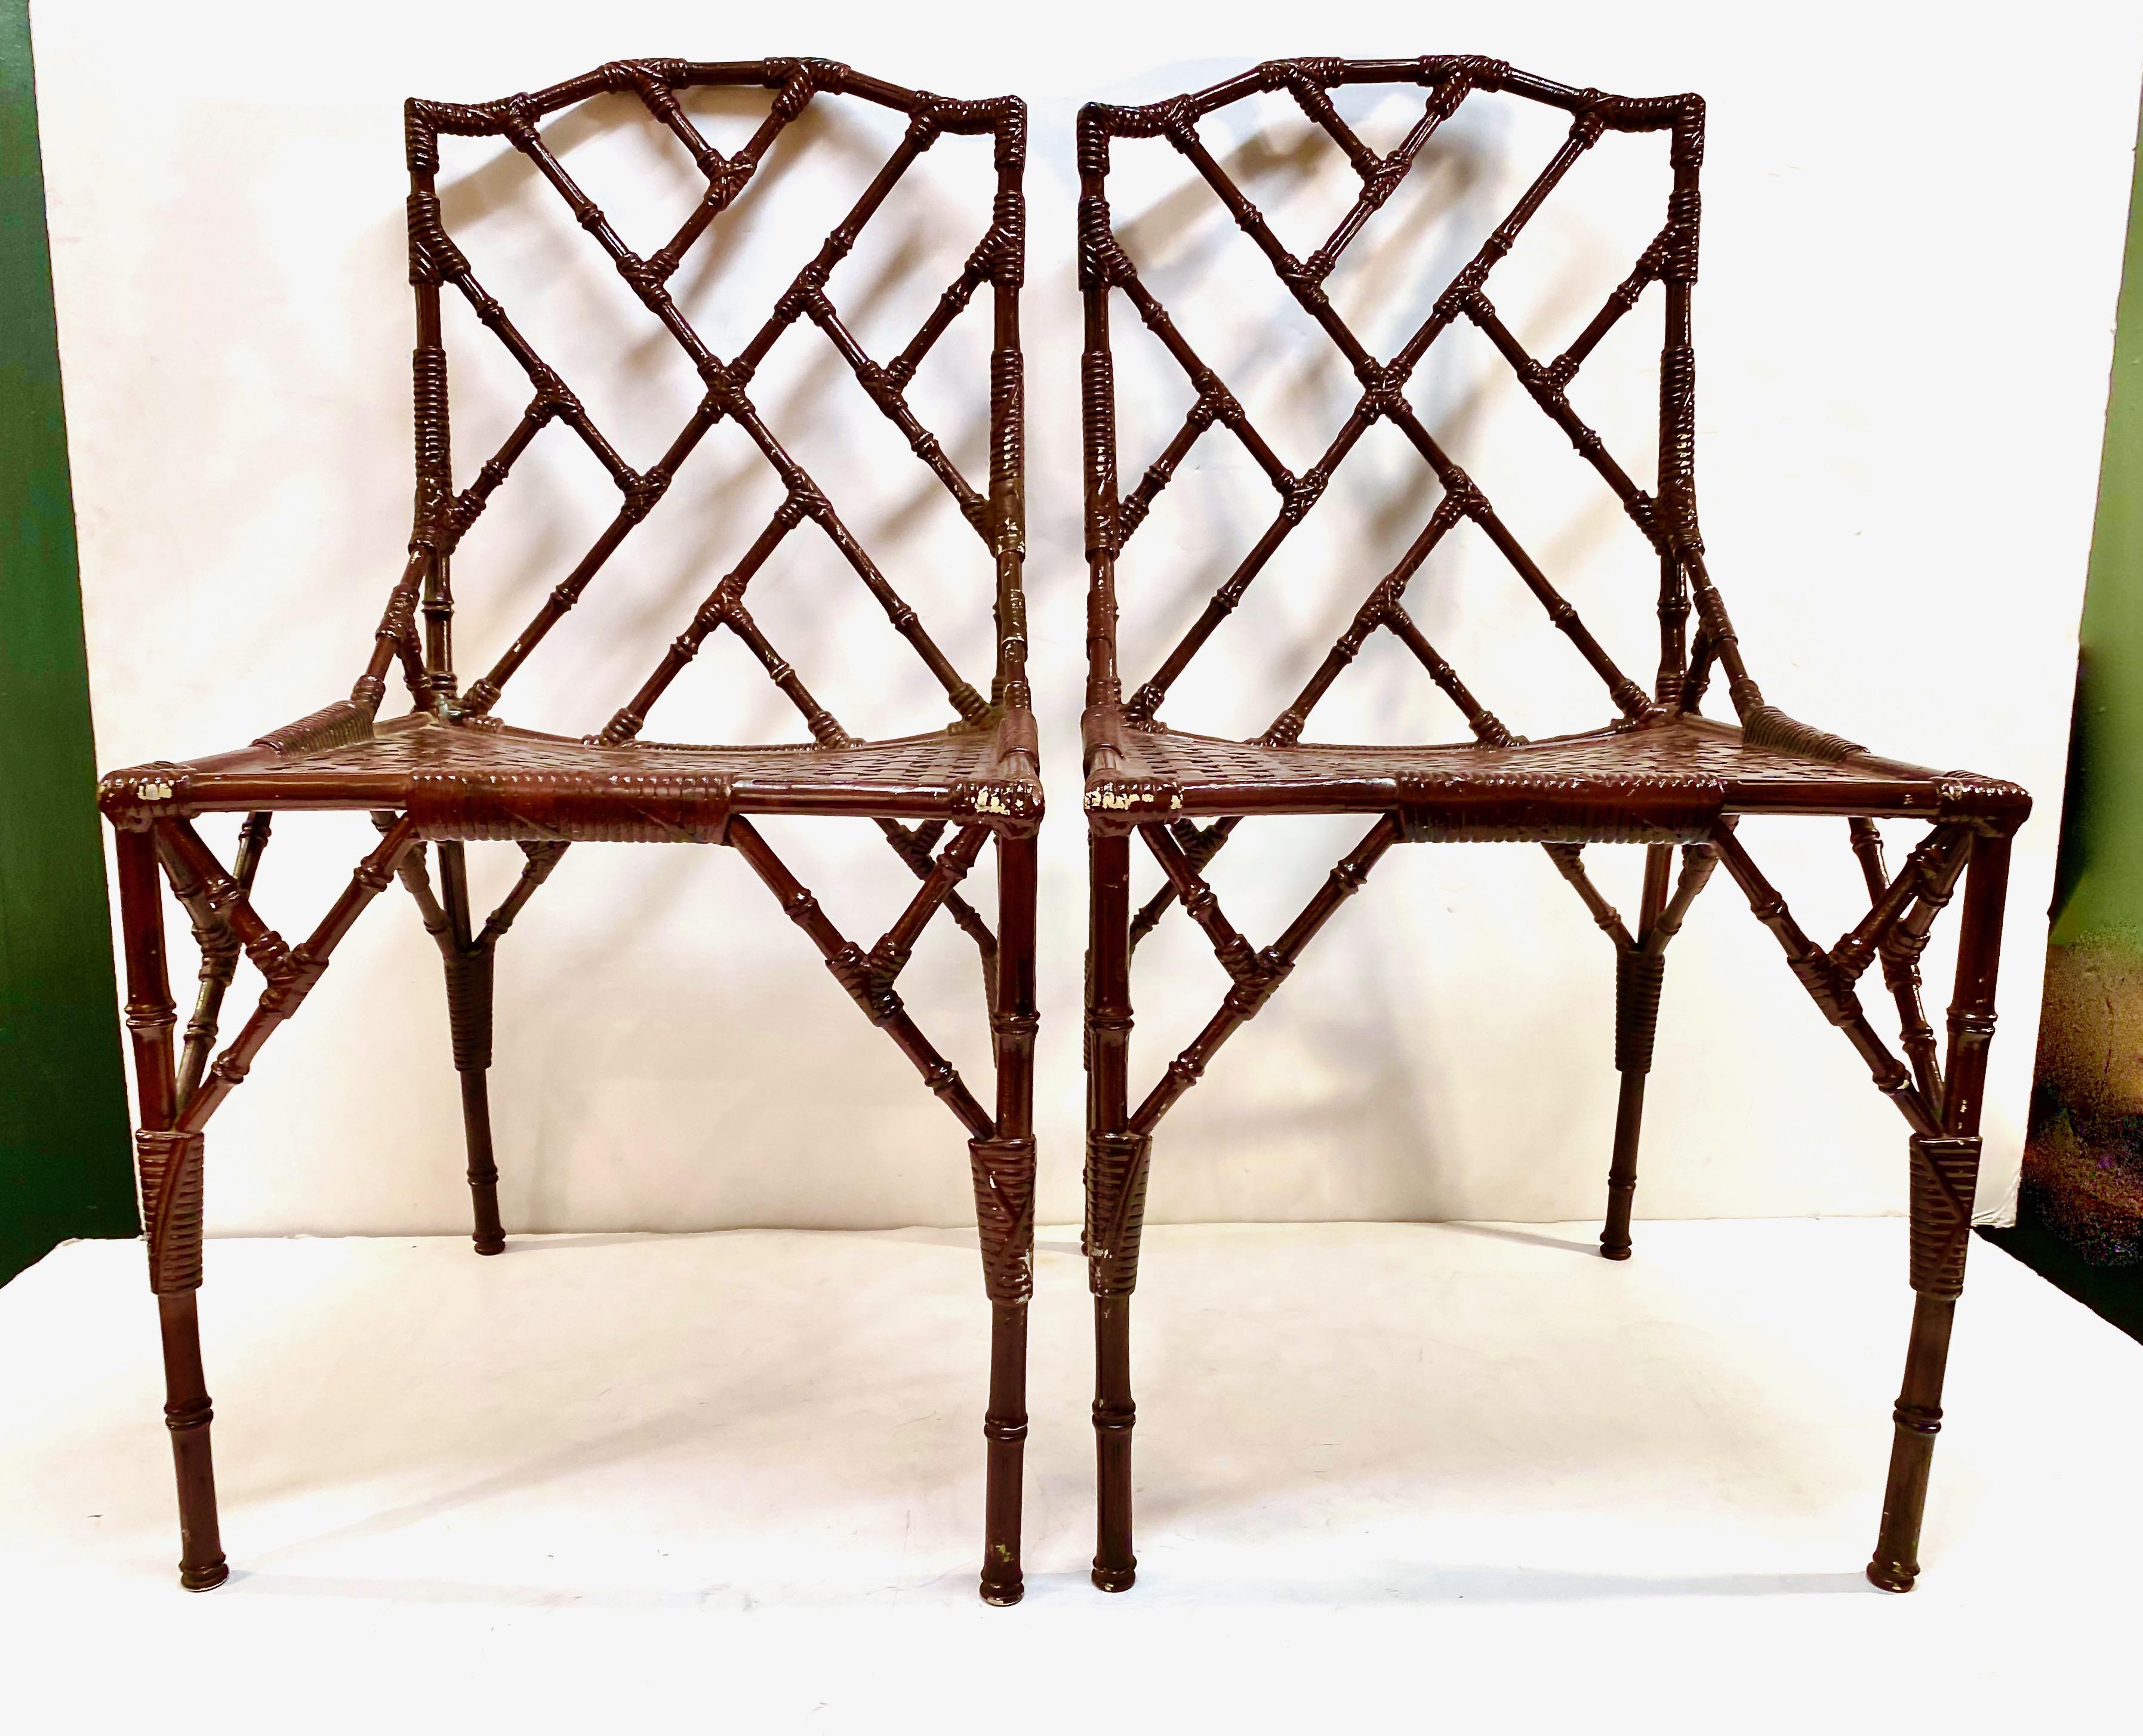 Set of Four Faux Bamboo Chairs and Table, c. 1970-1980 In Good Condition For Sale In Pasadena, CA